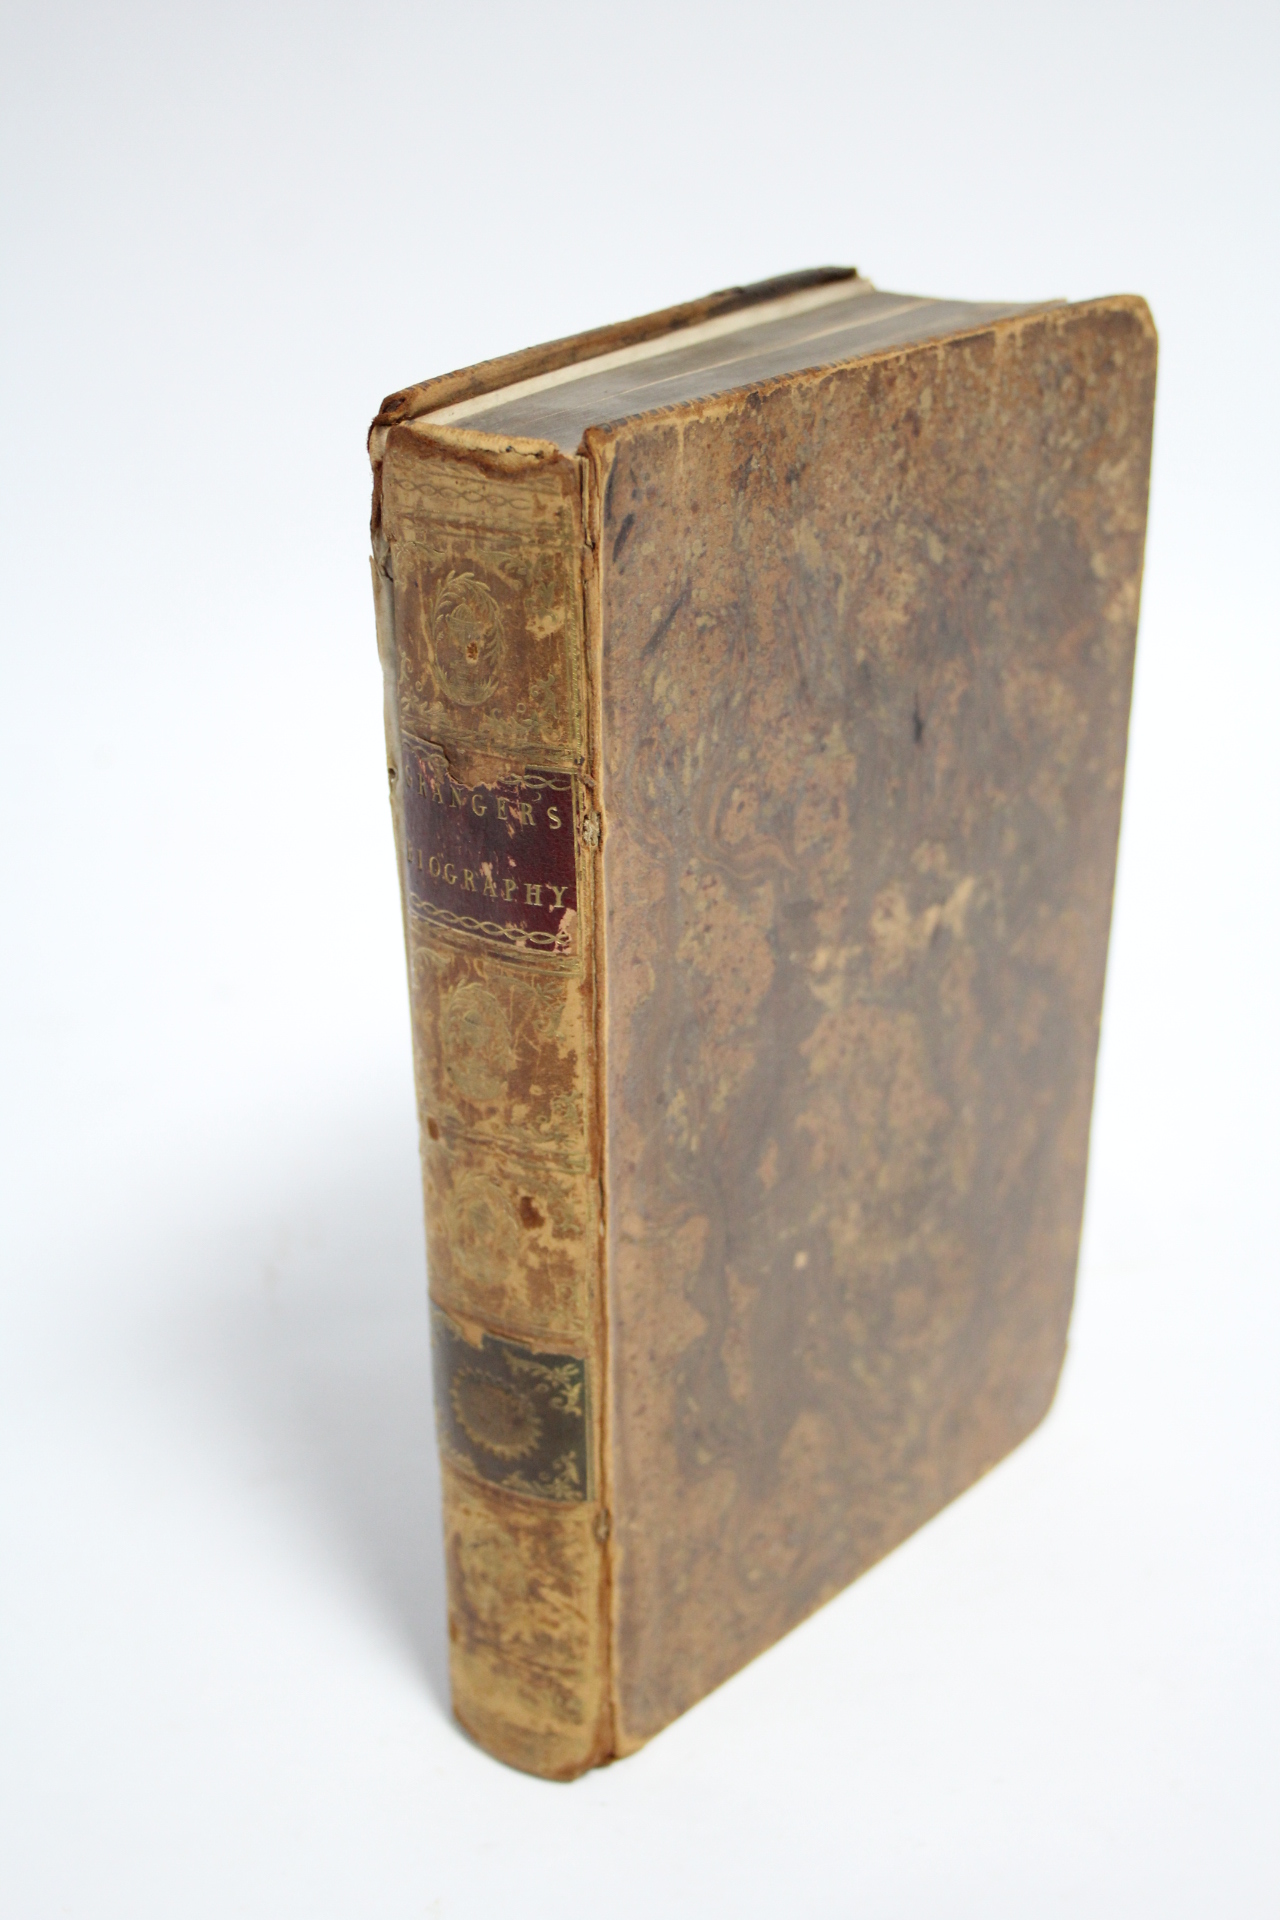 A late 18th century leather-bound volume “A Biographical History of England From Egbert the Great to